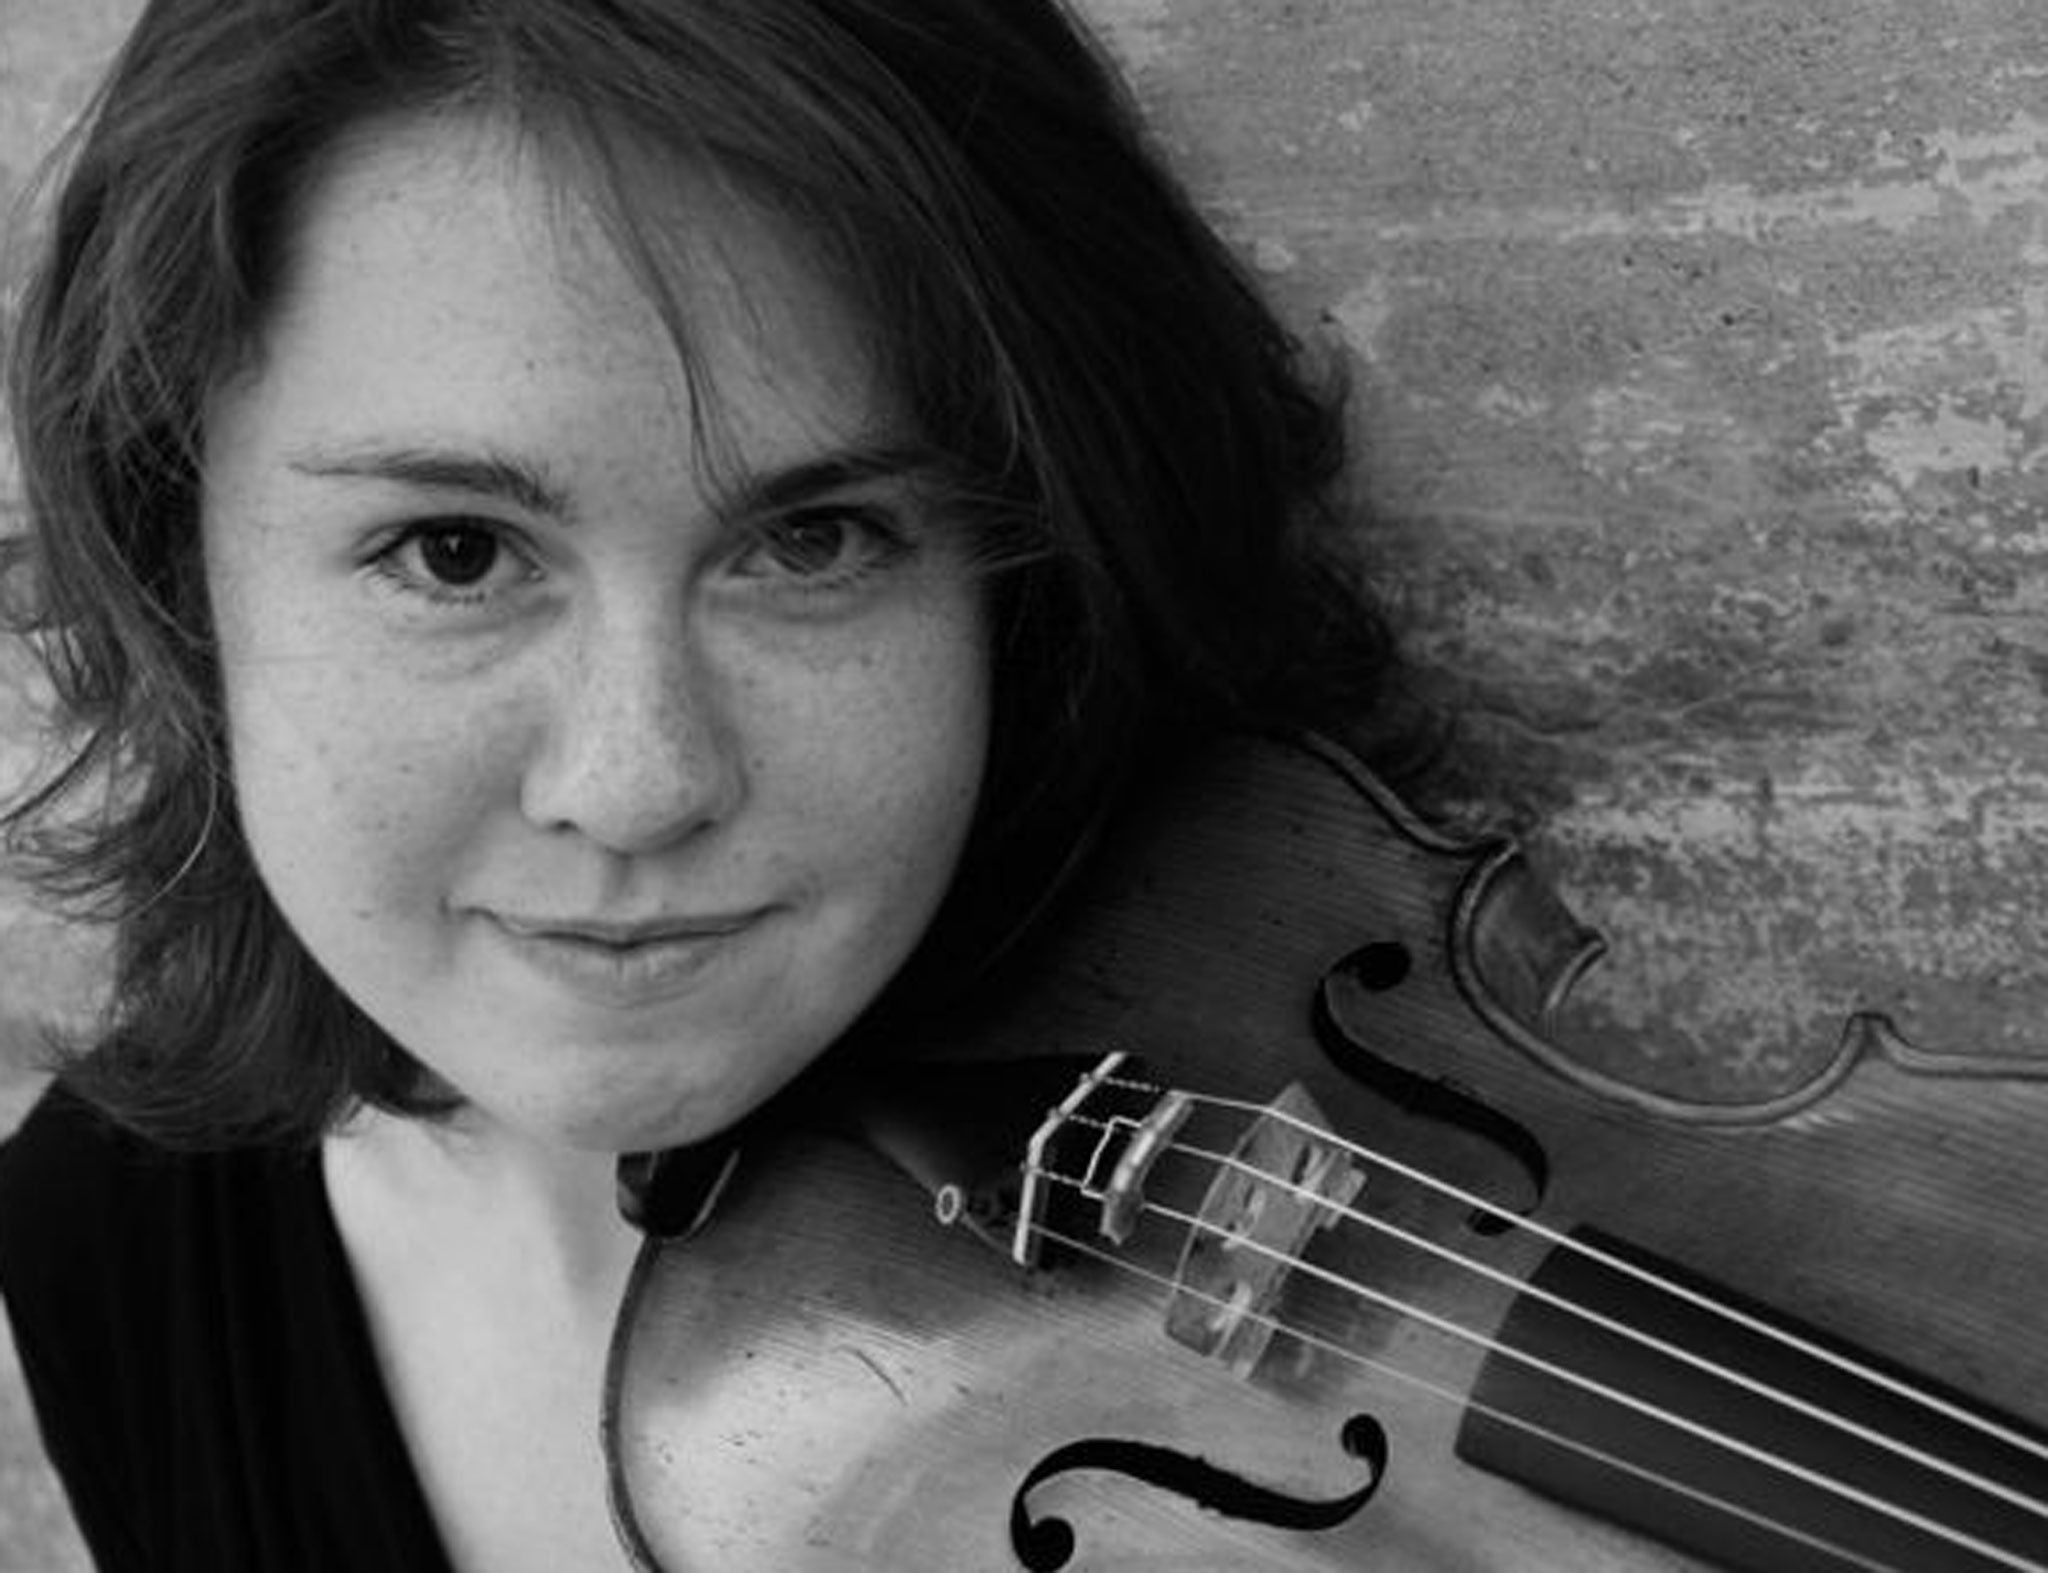 Caroline Shaw won this year's Pulitzer Prize for musical composition